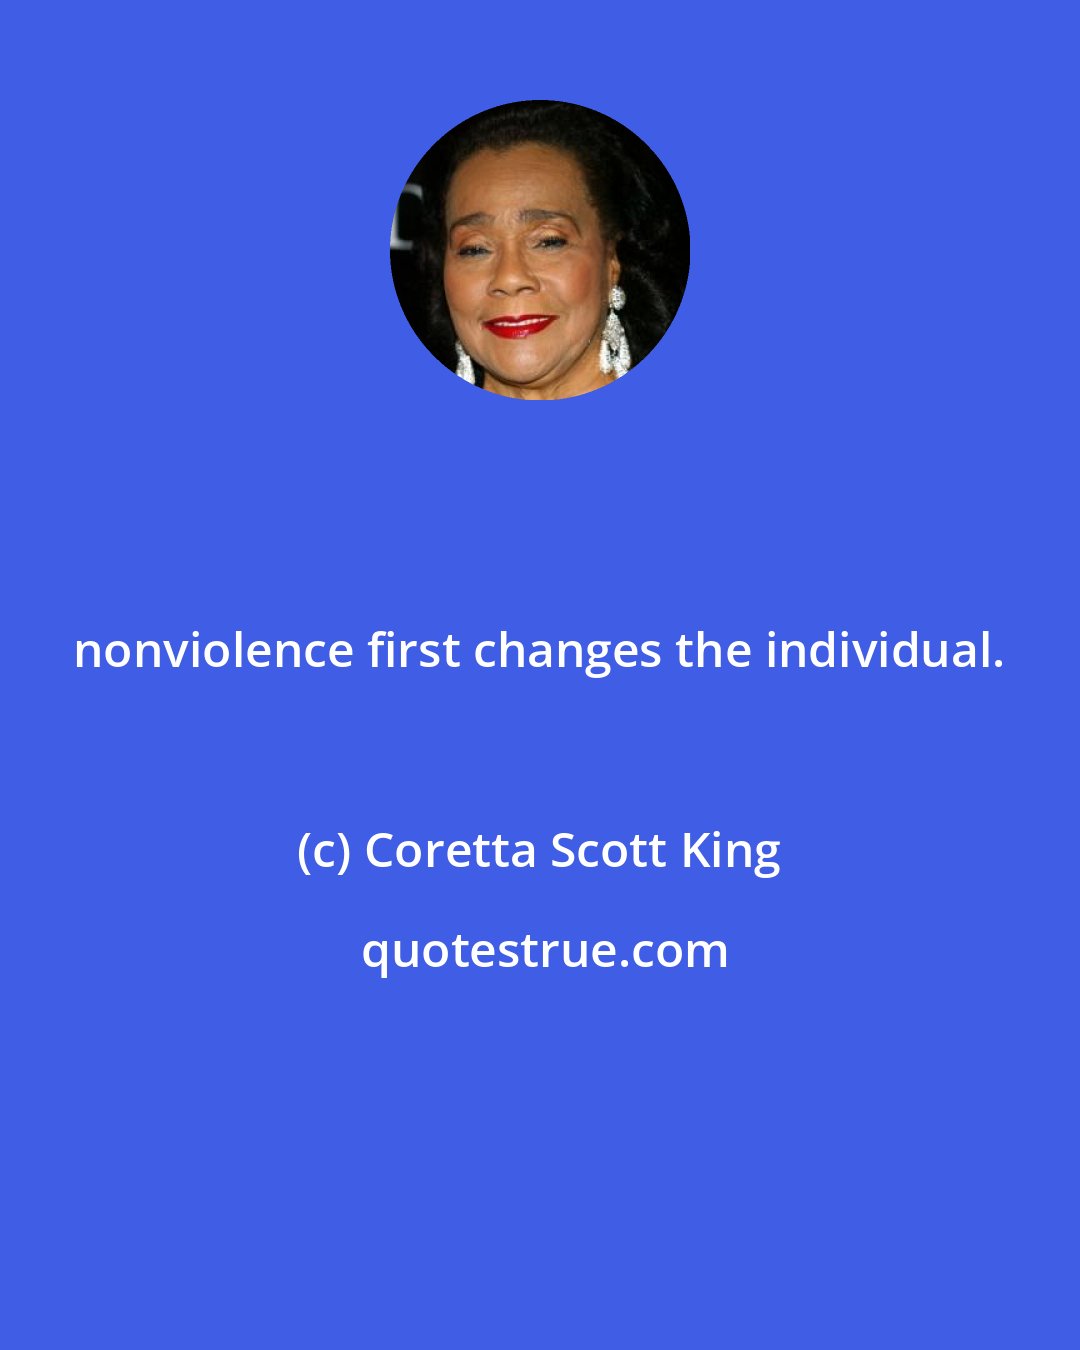 Coretta Scott King: nonviolence first changes the individual.